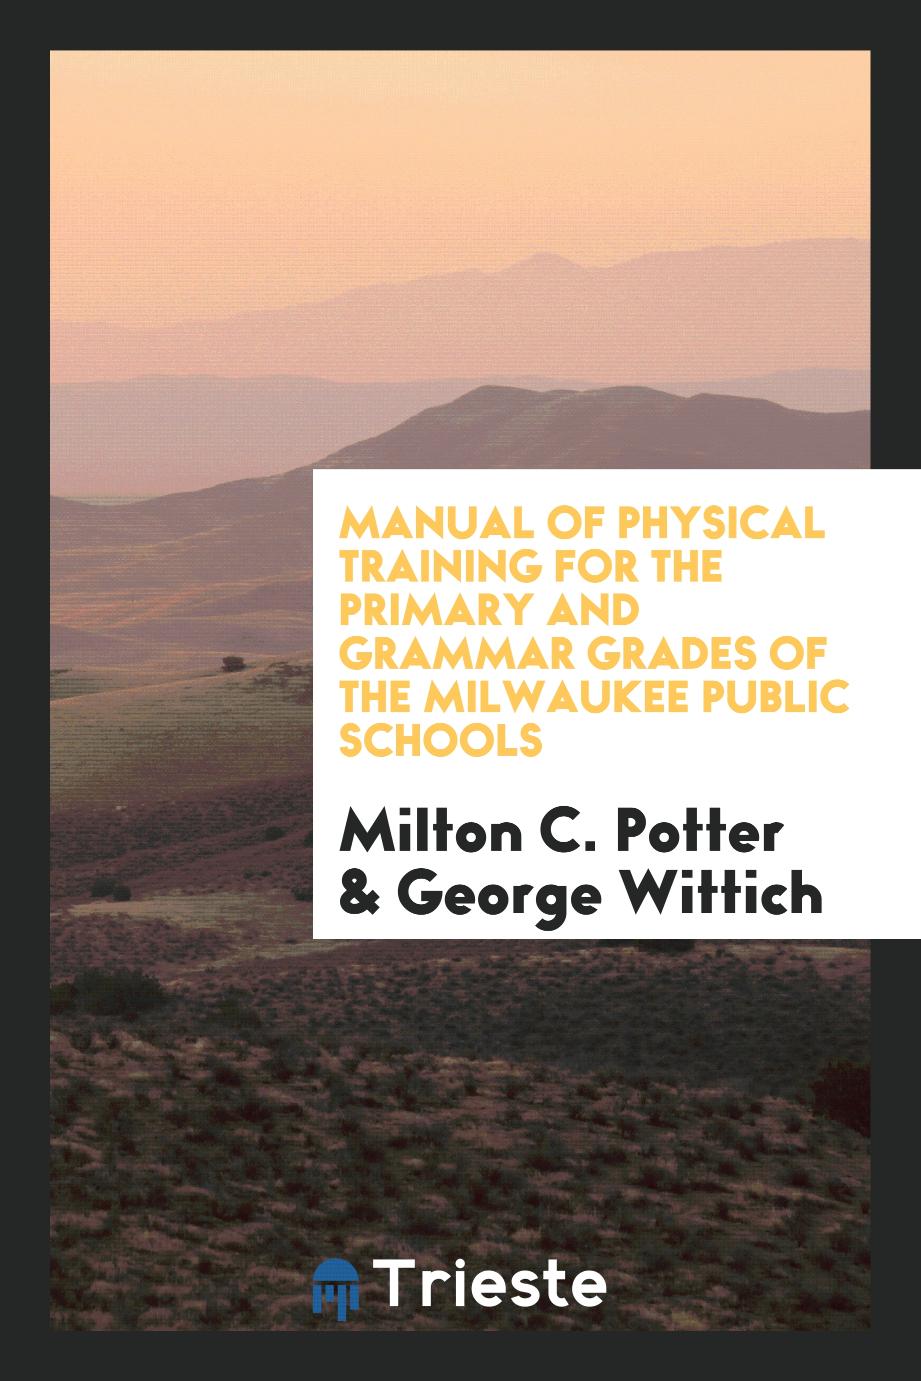 Manual of Physical Training for the Primary and Grammar Grades of the Milwaukee Public Schools